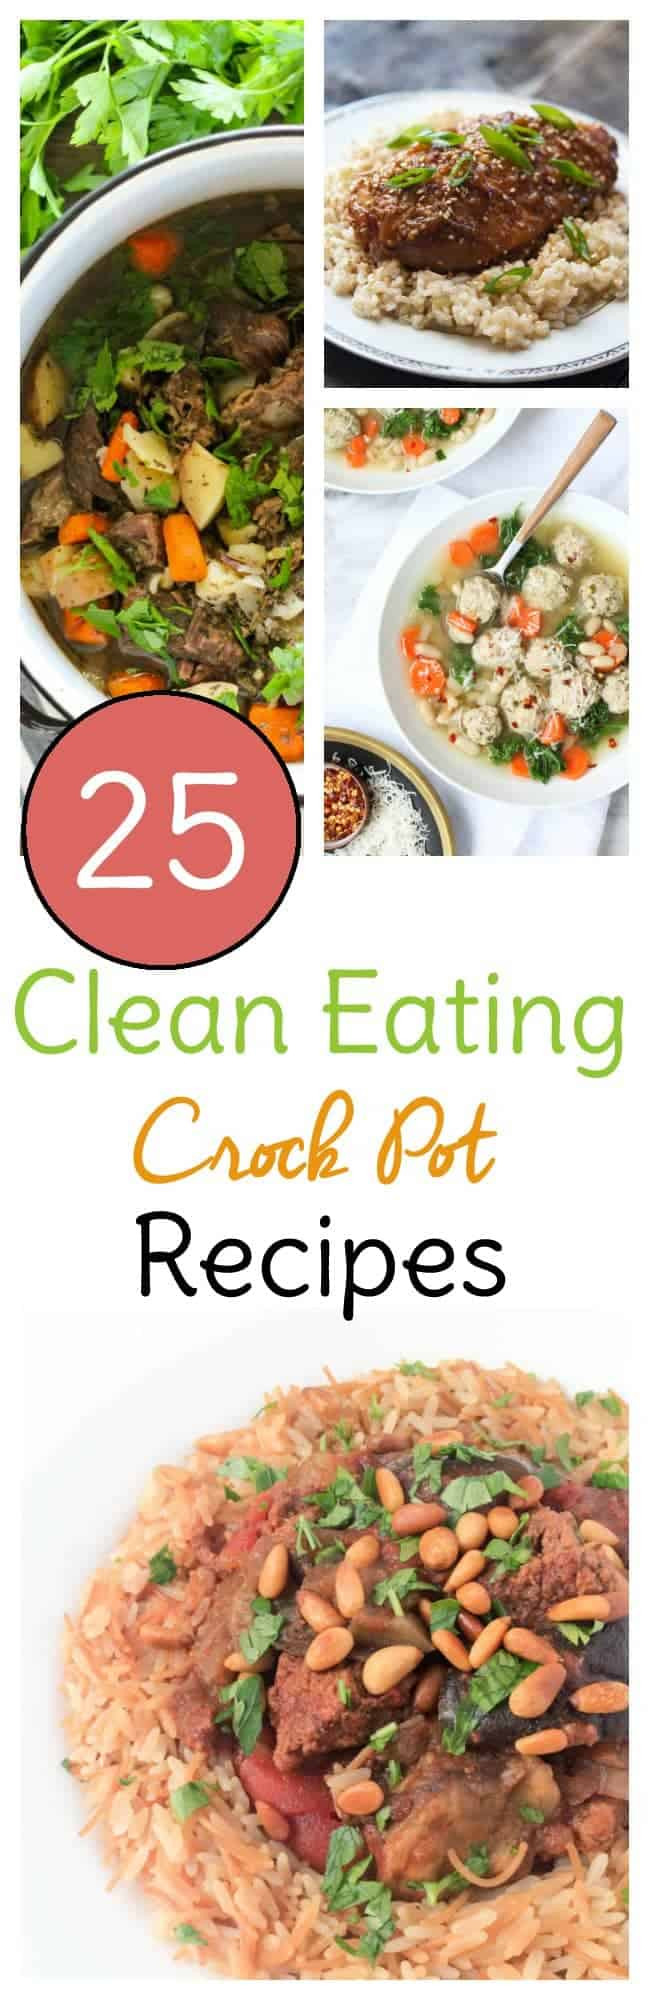 Clean Eating Crockpot Meals
 Clean Eating Crock Pot Recipes Sweet T Makes Three